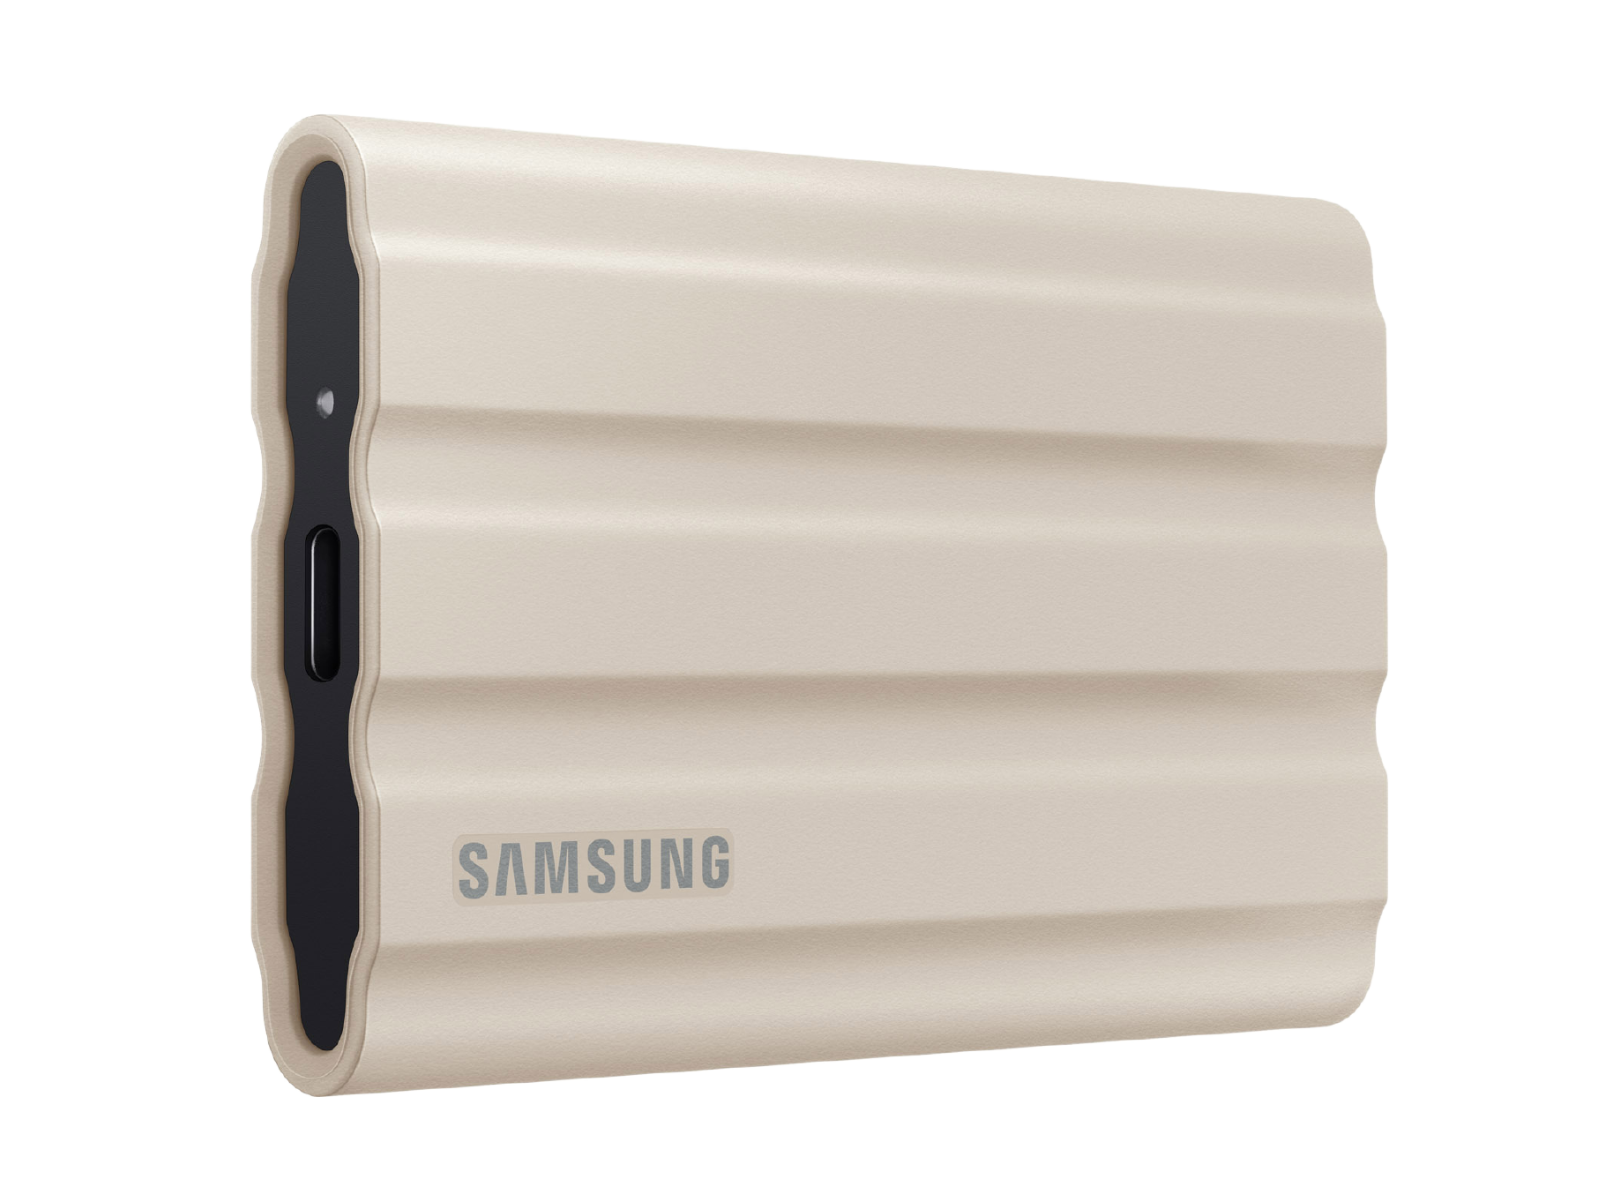 https://image-us.samsung.com/SamsungUS/home/computing/memory-and-storage/portable-solid-state-drives/01092023/BEIGE.png?$product-details-jpg$